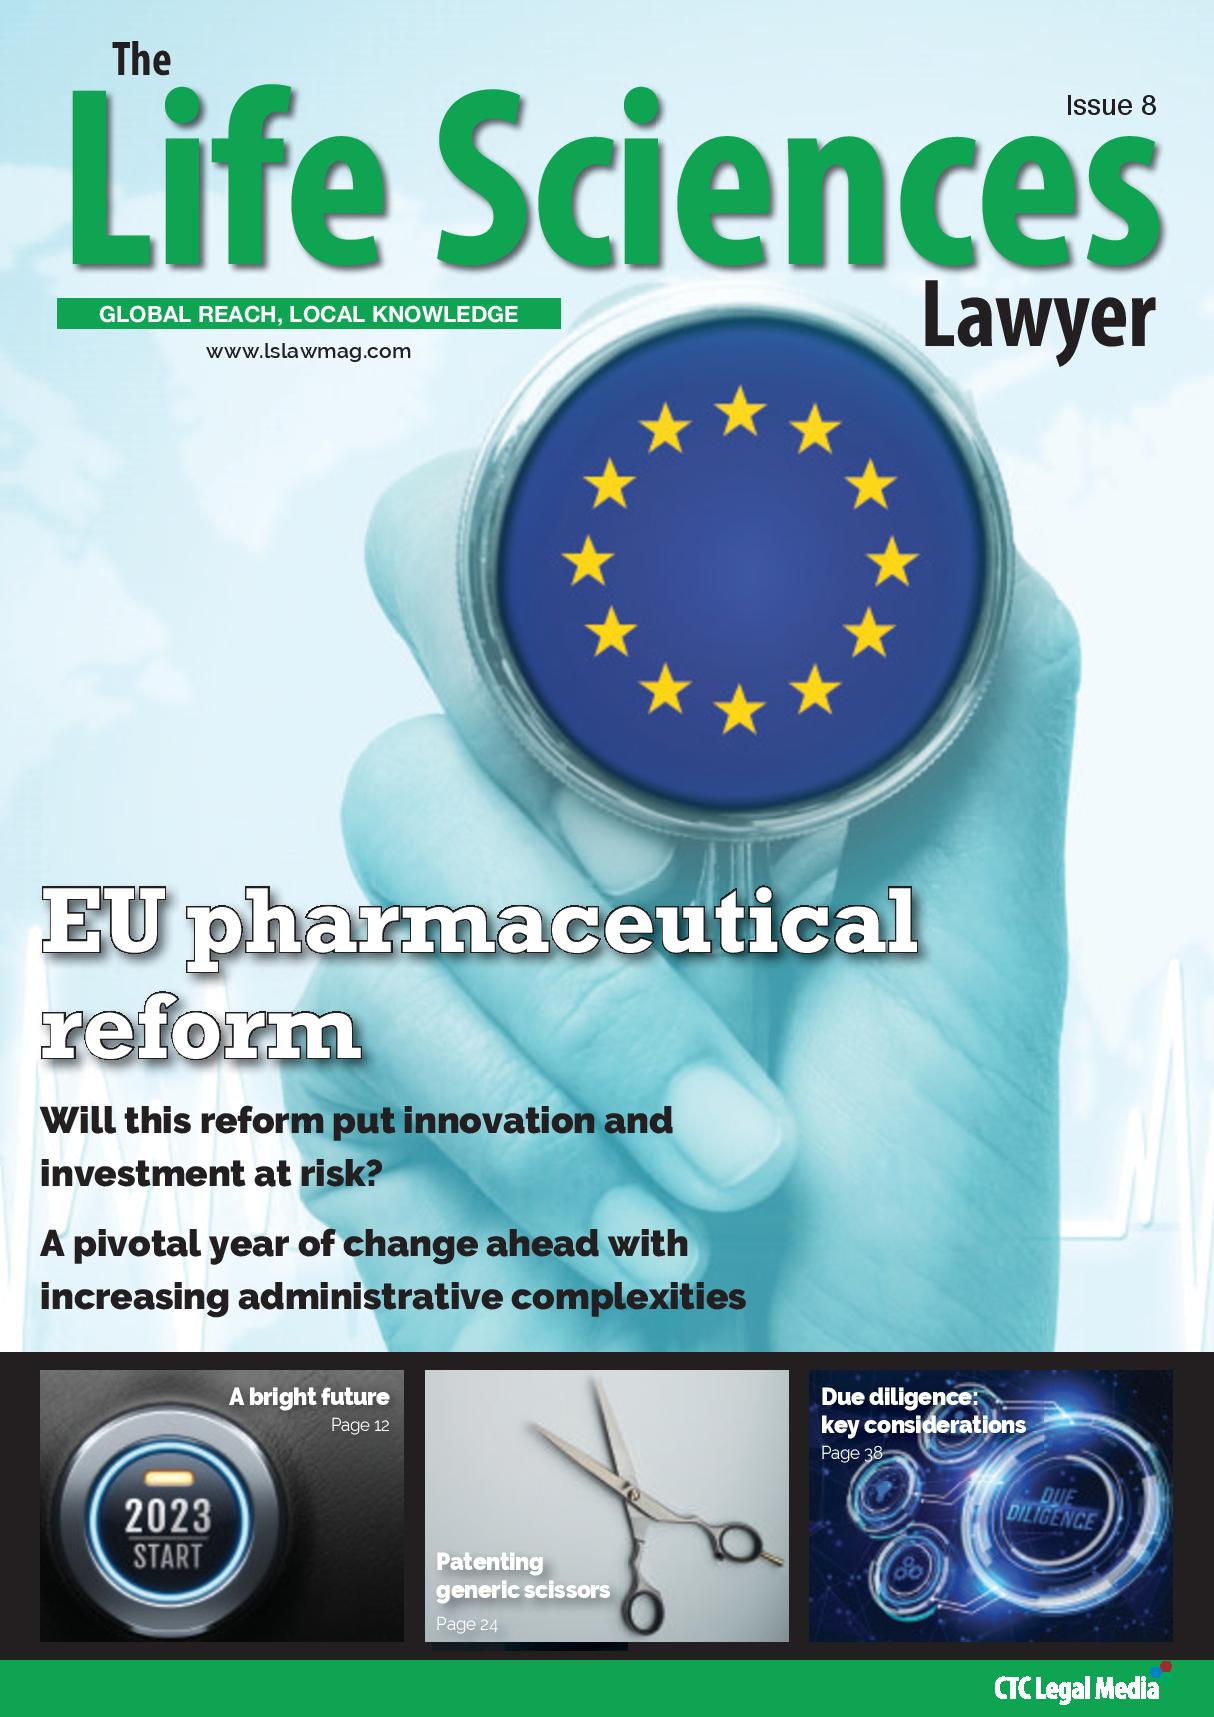 The Life Sciences Lawyer Issue 8